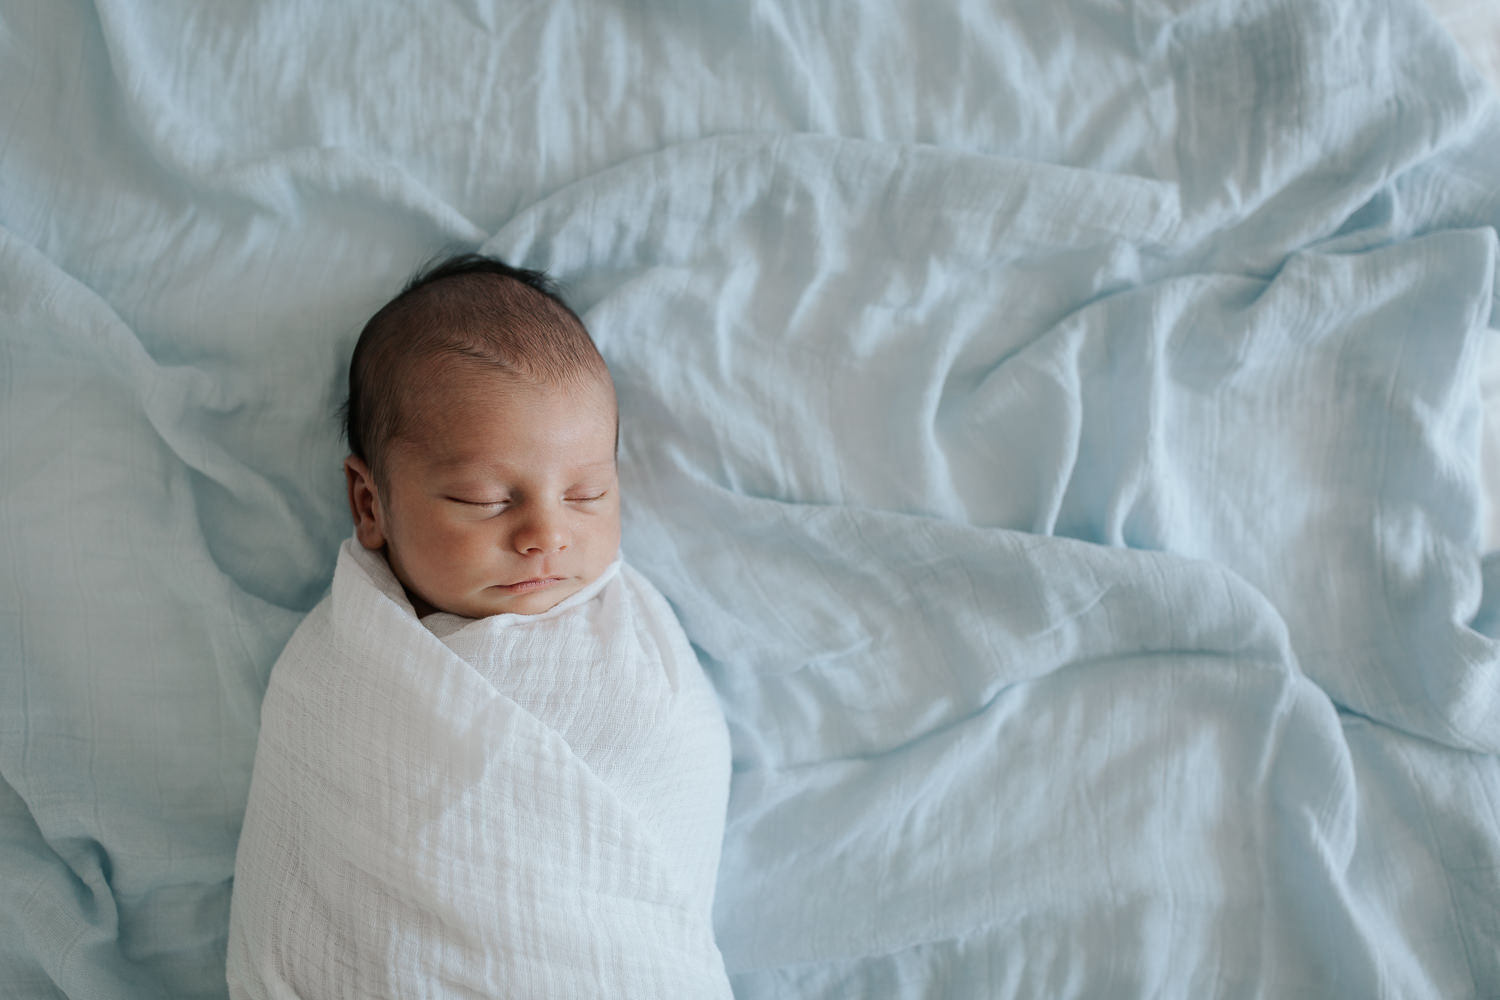 2 week old baby boy with dark hair wrapped in white swaddle lying asleep on bed with blue blanket as background - GTA In-Home Photos